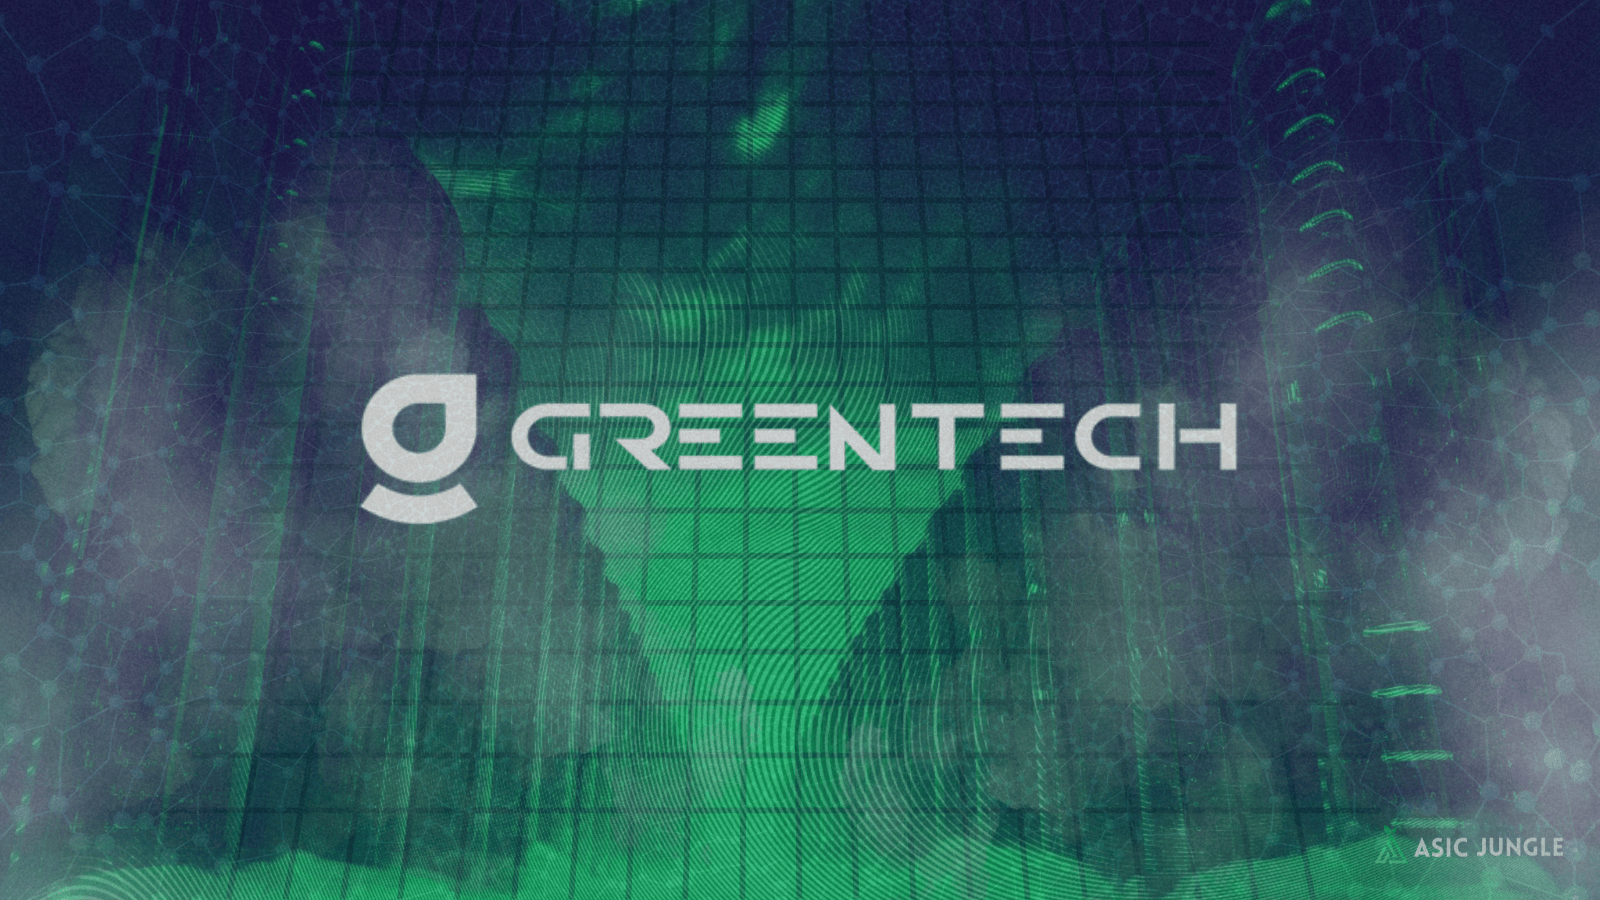 GREENTECH Technologies: a Sustainable Energy Leader in Heat Recovery with Immersion Cooling